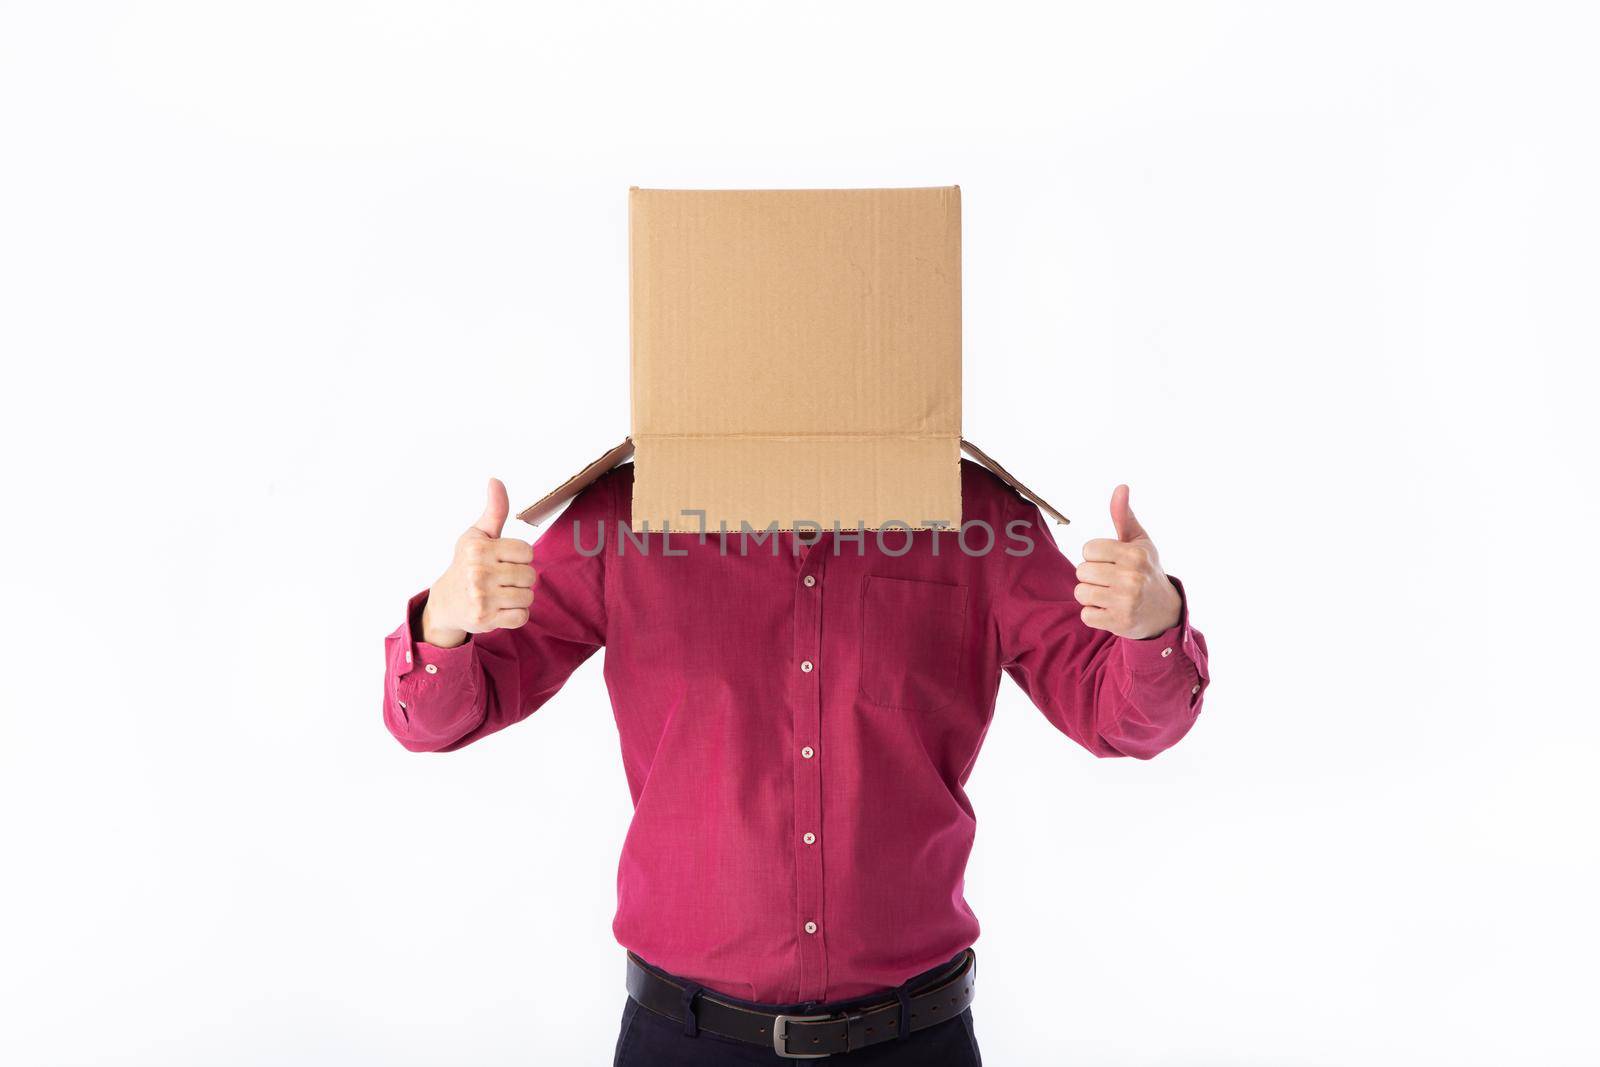 man in a red shirt with a cardboard box on his head makes a gesture with his hands isolated on white background